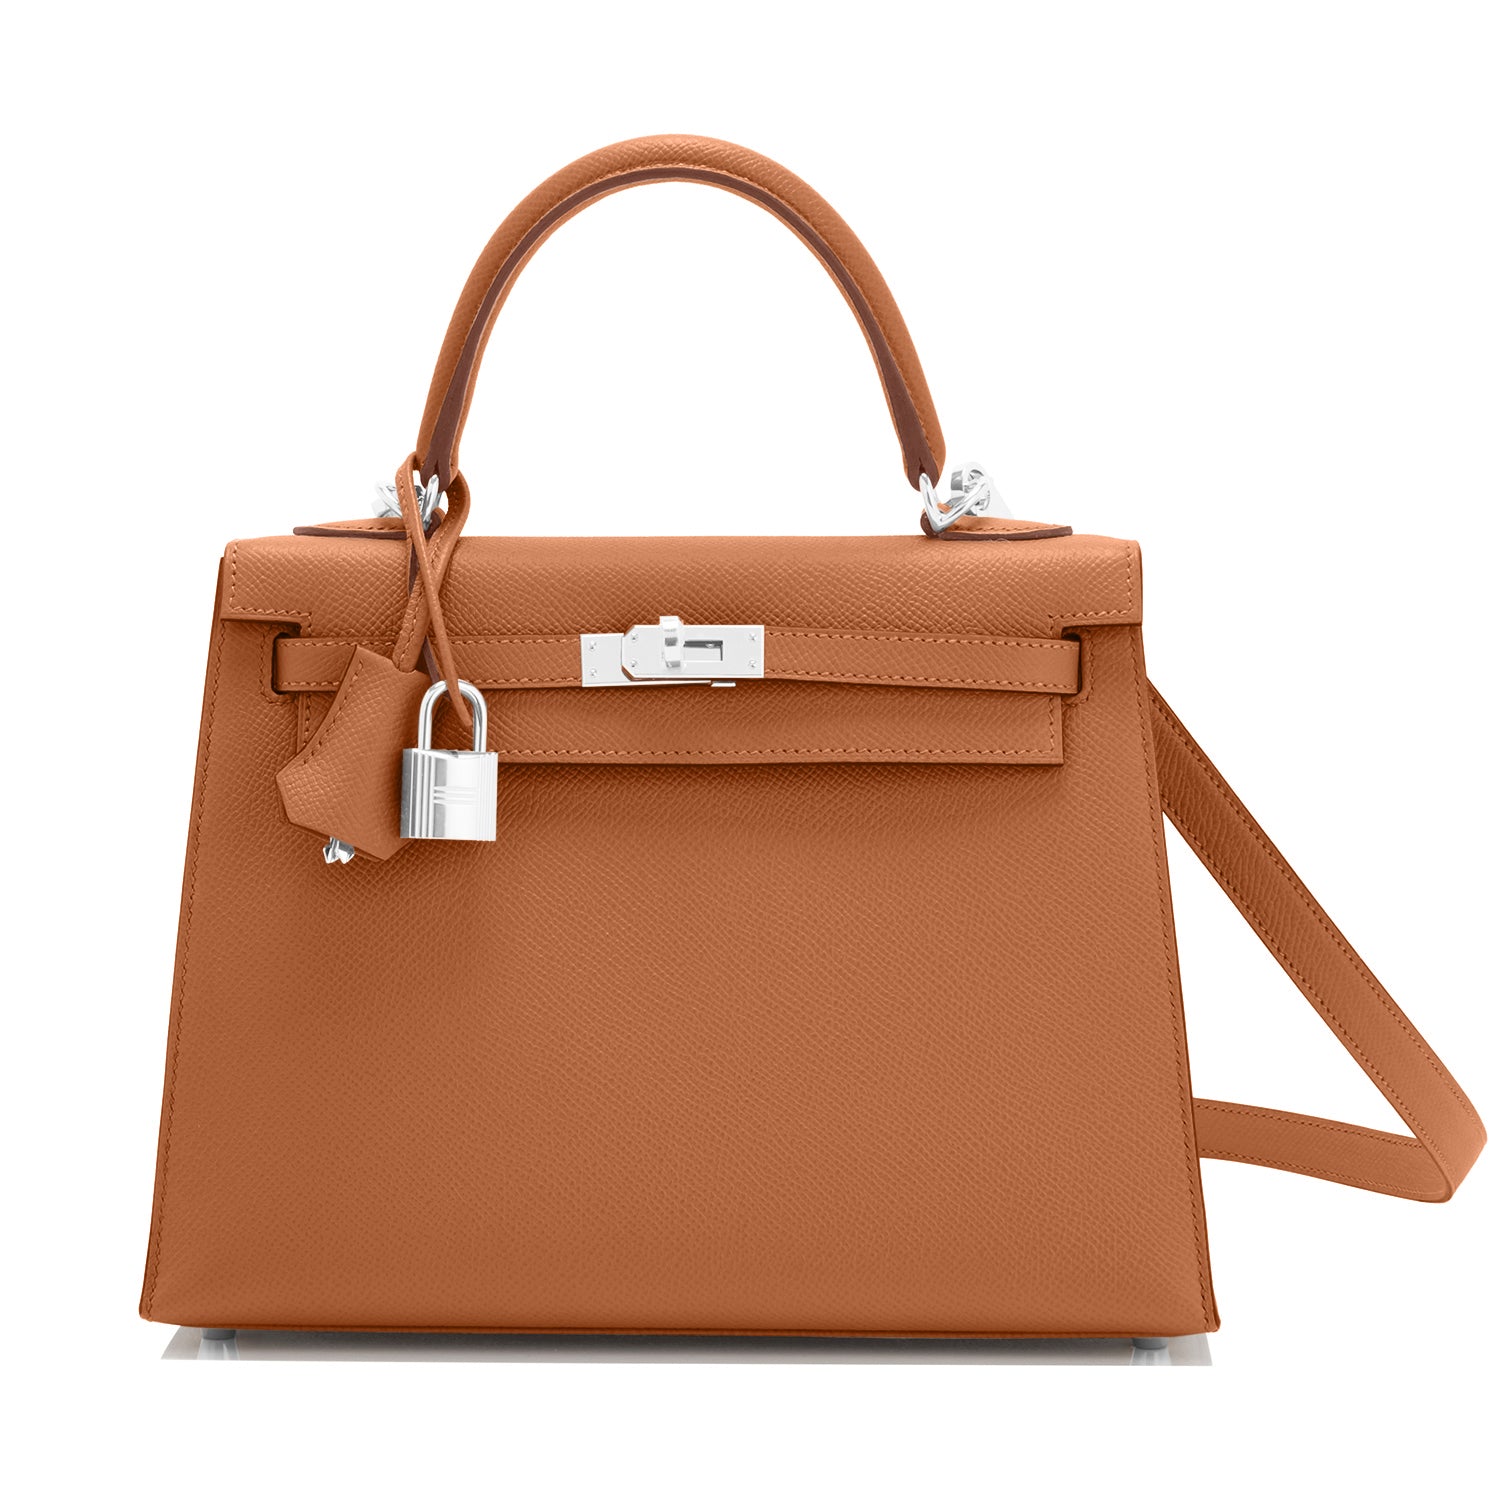 HERMES favourite color for Birkin and Kelly bag